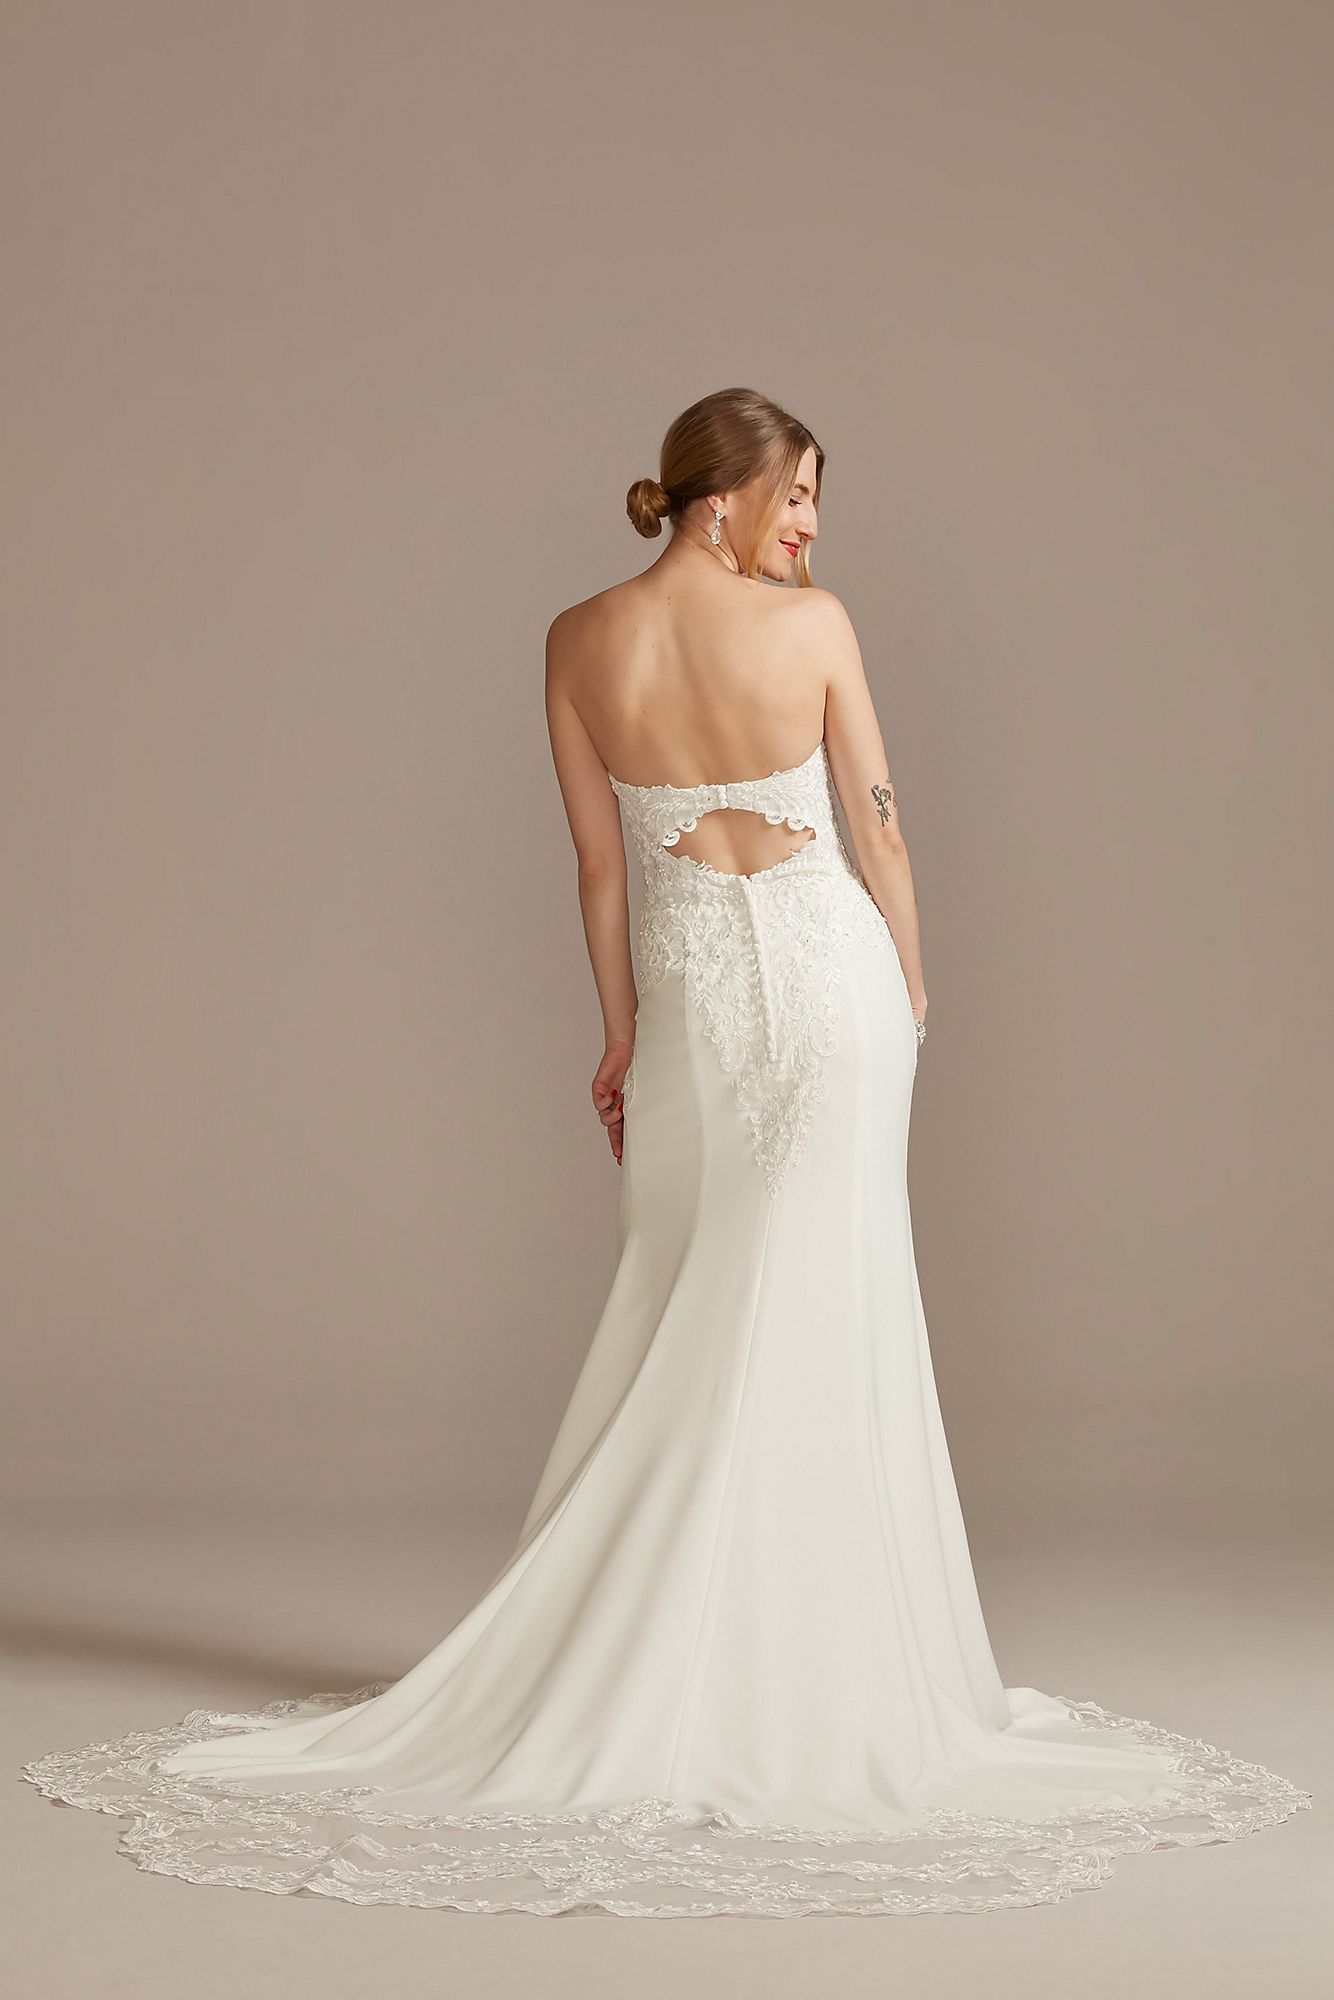 Beaded Bodice Lace Wedding Dress with Back Strap Galina Signature LBSV830